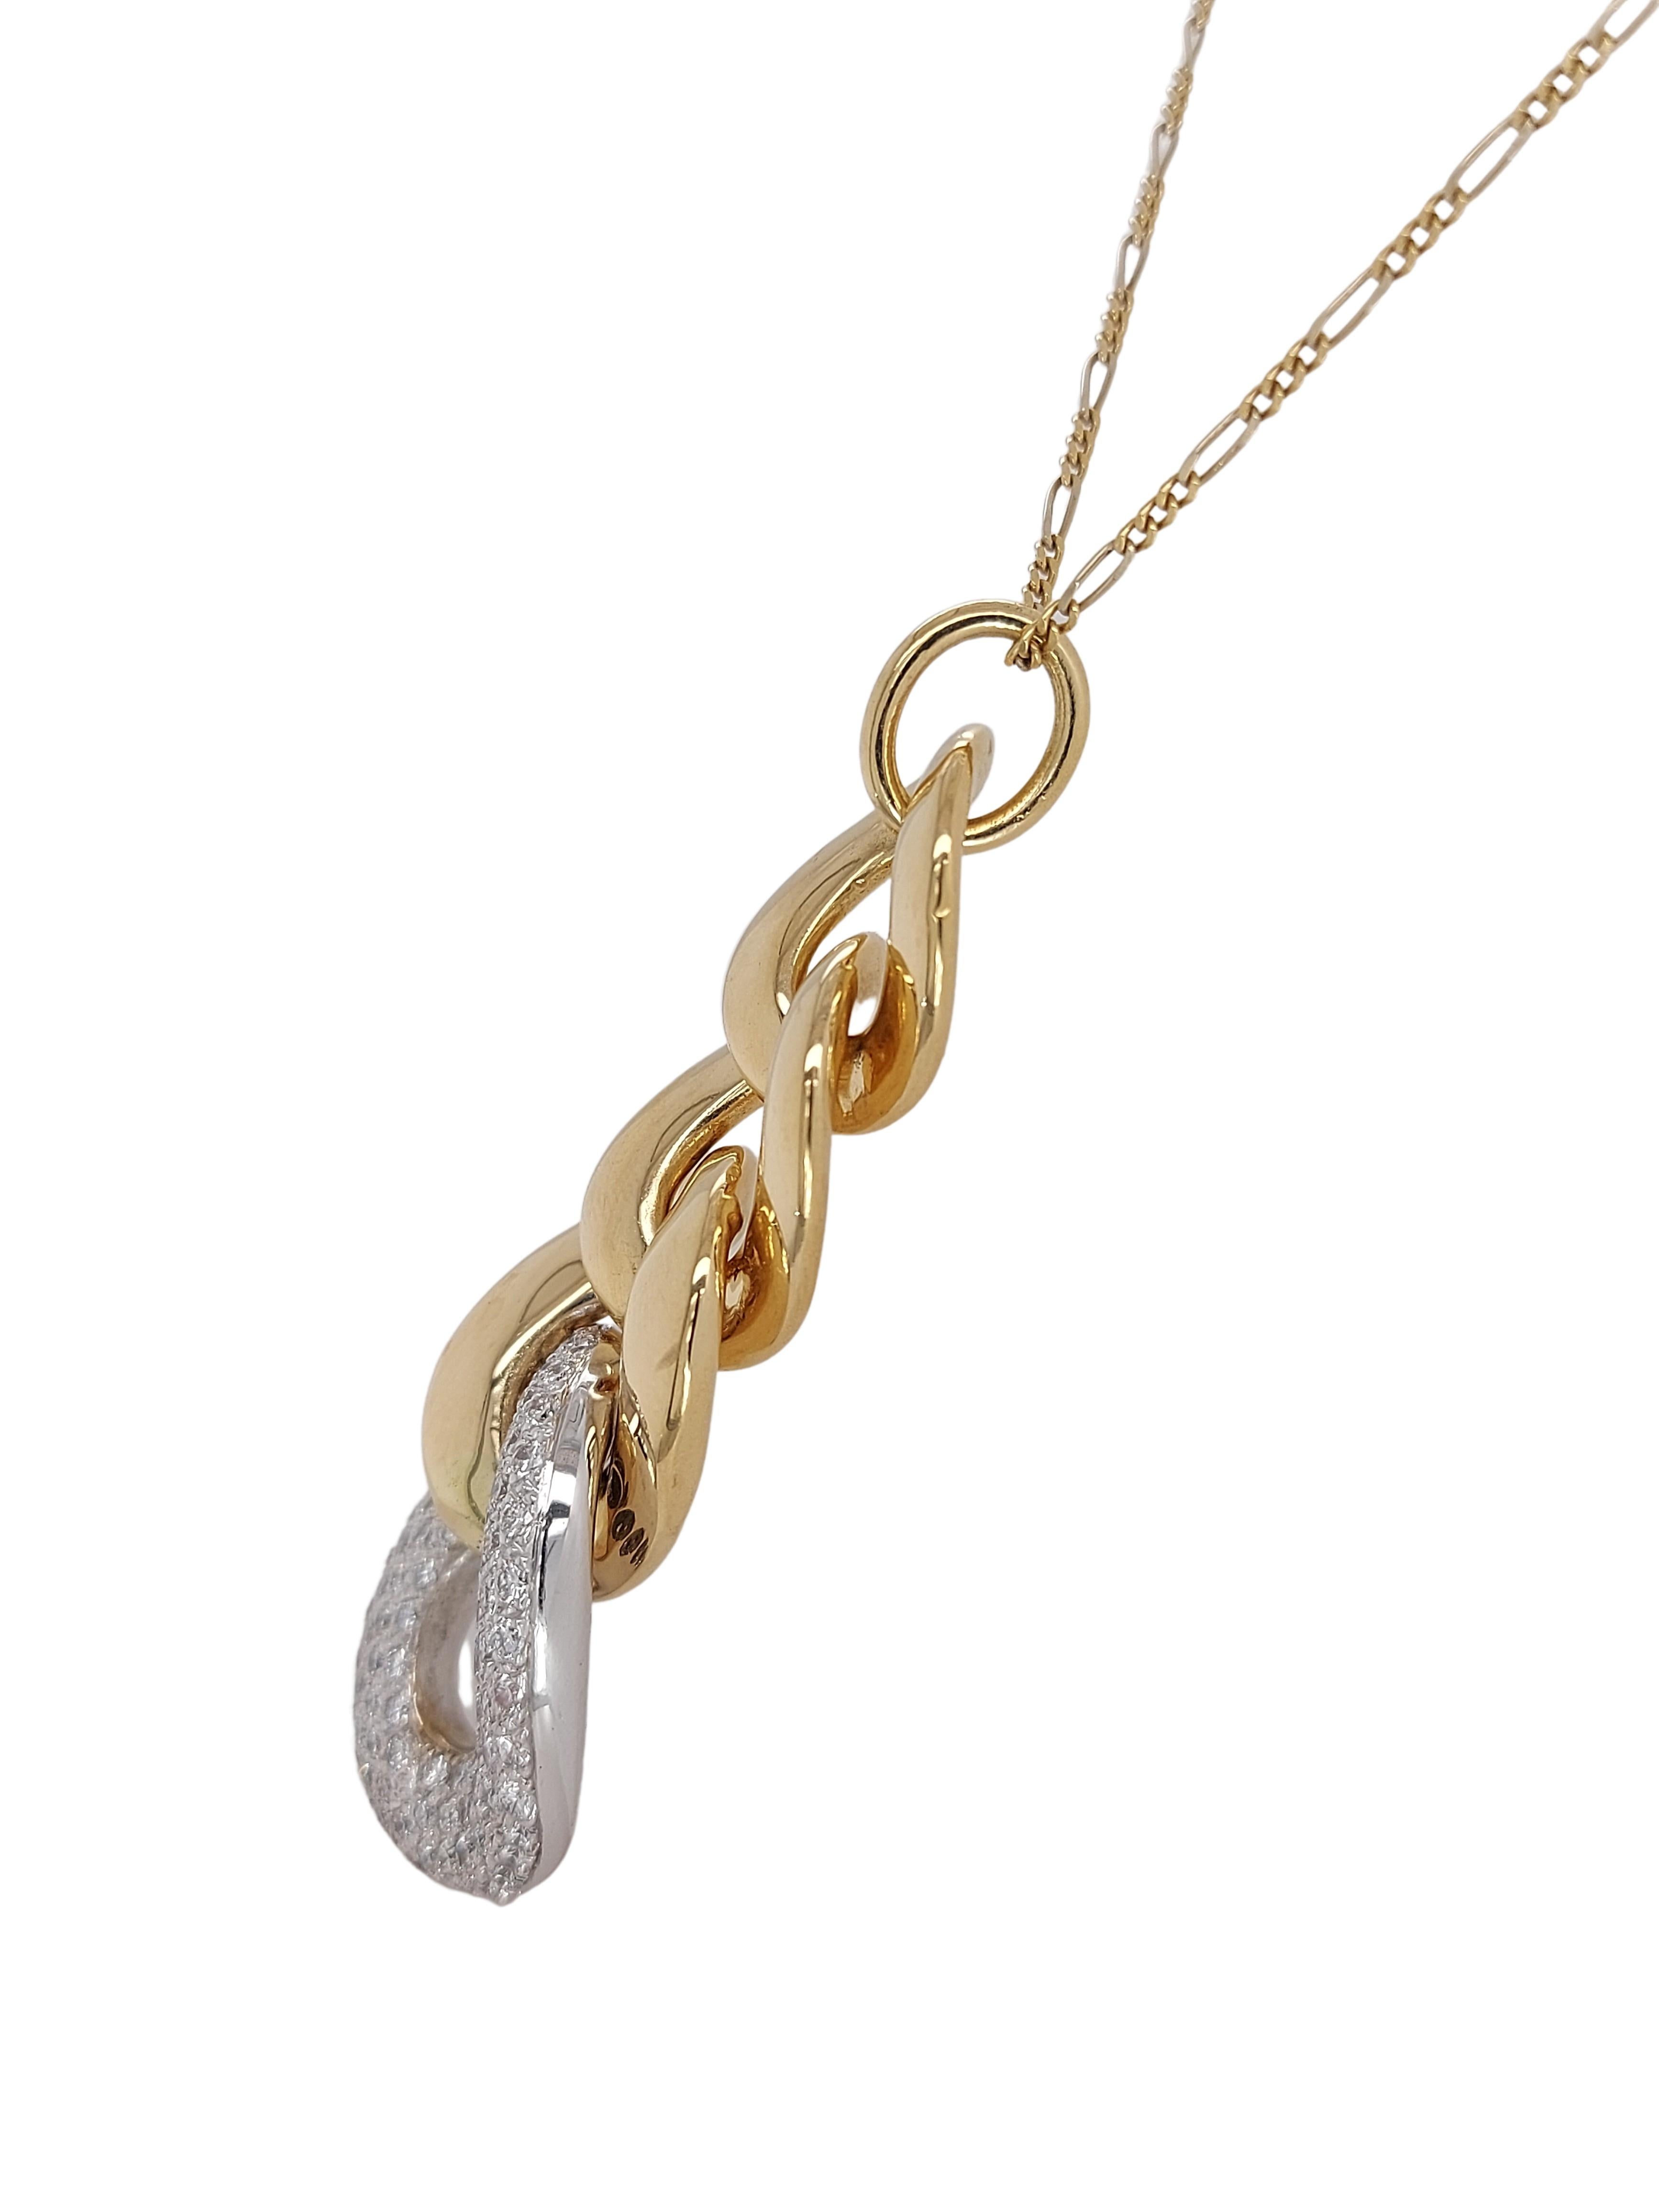 Artisan Stunning 18kt Yellow & White Gold Diamond Pendant/ Necklace with 2.6ct Diamonds For Sale